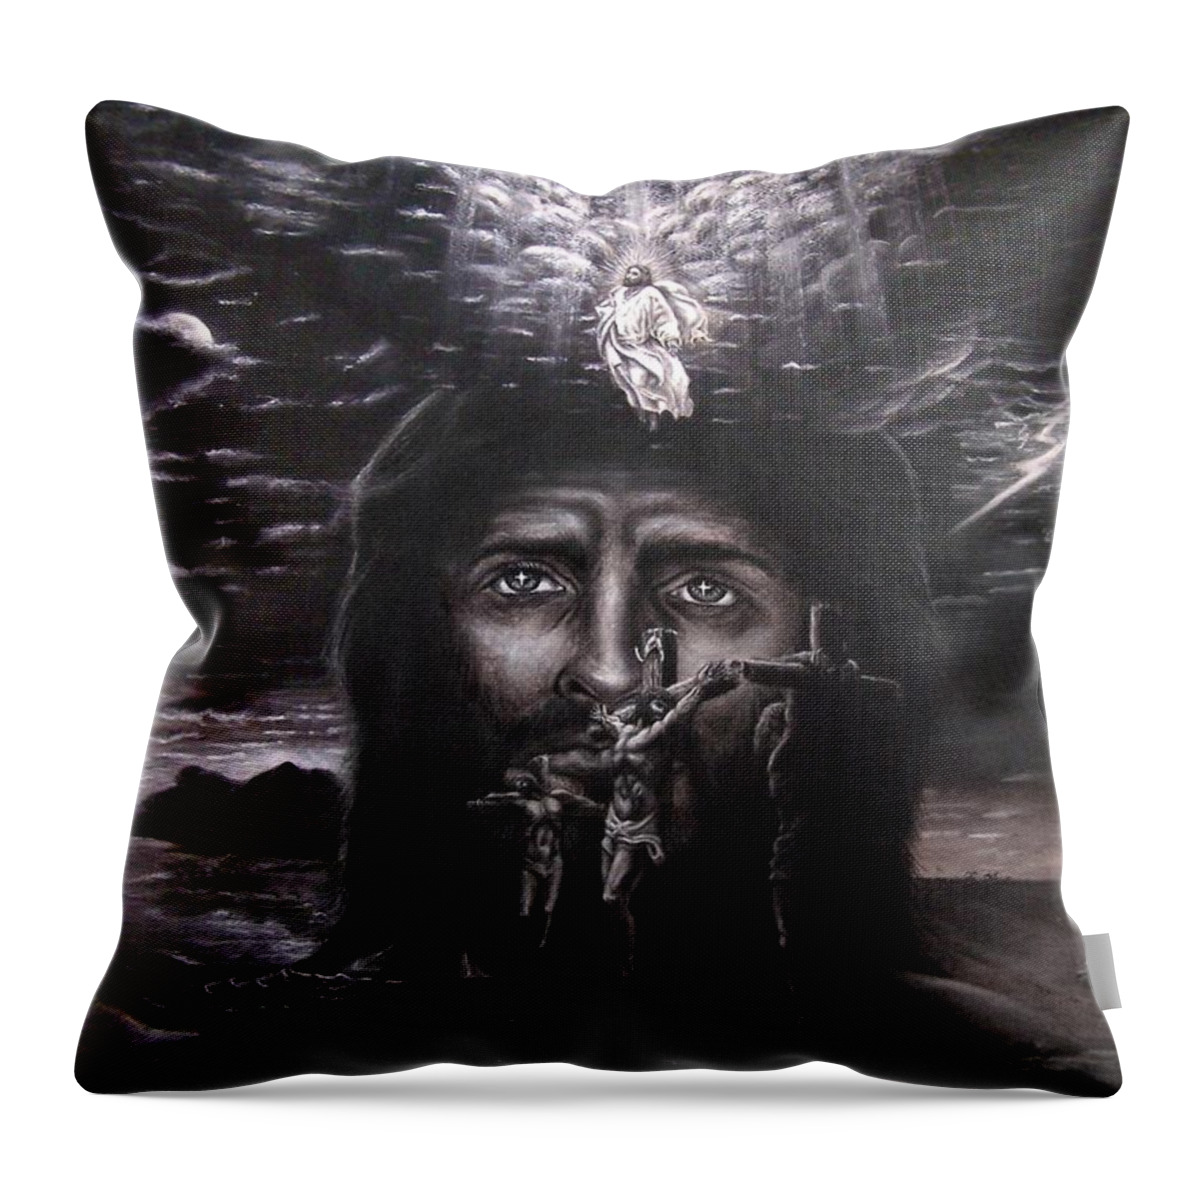 Gospel Throw Pillow featuring the drawing The Gospel by Bill Stephens